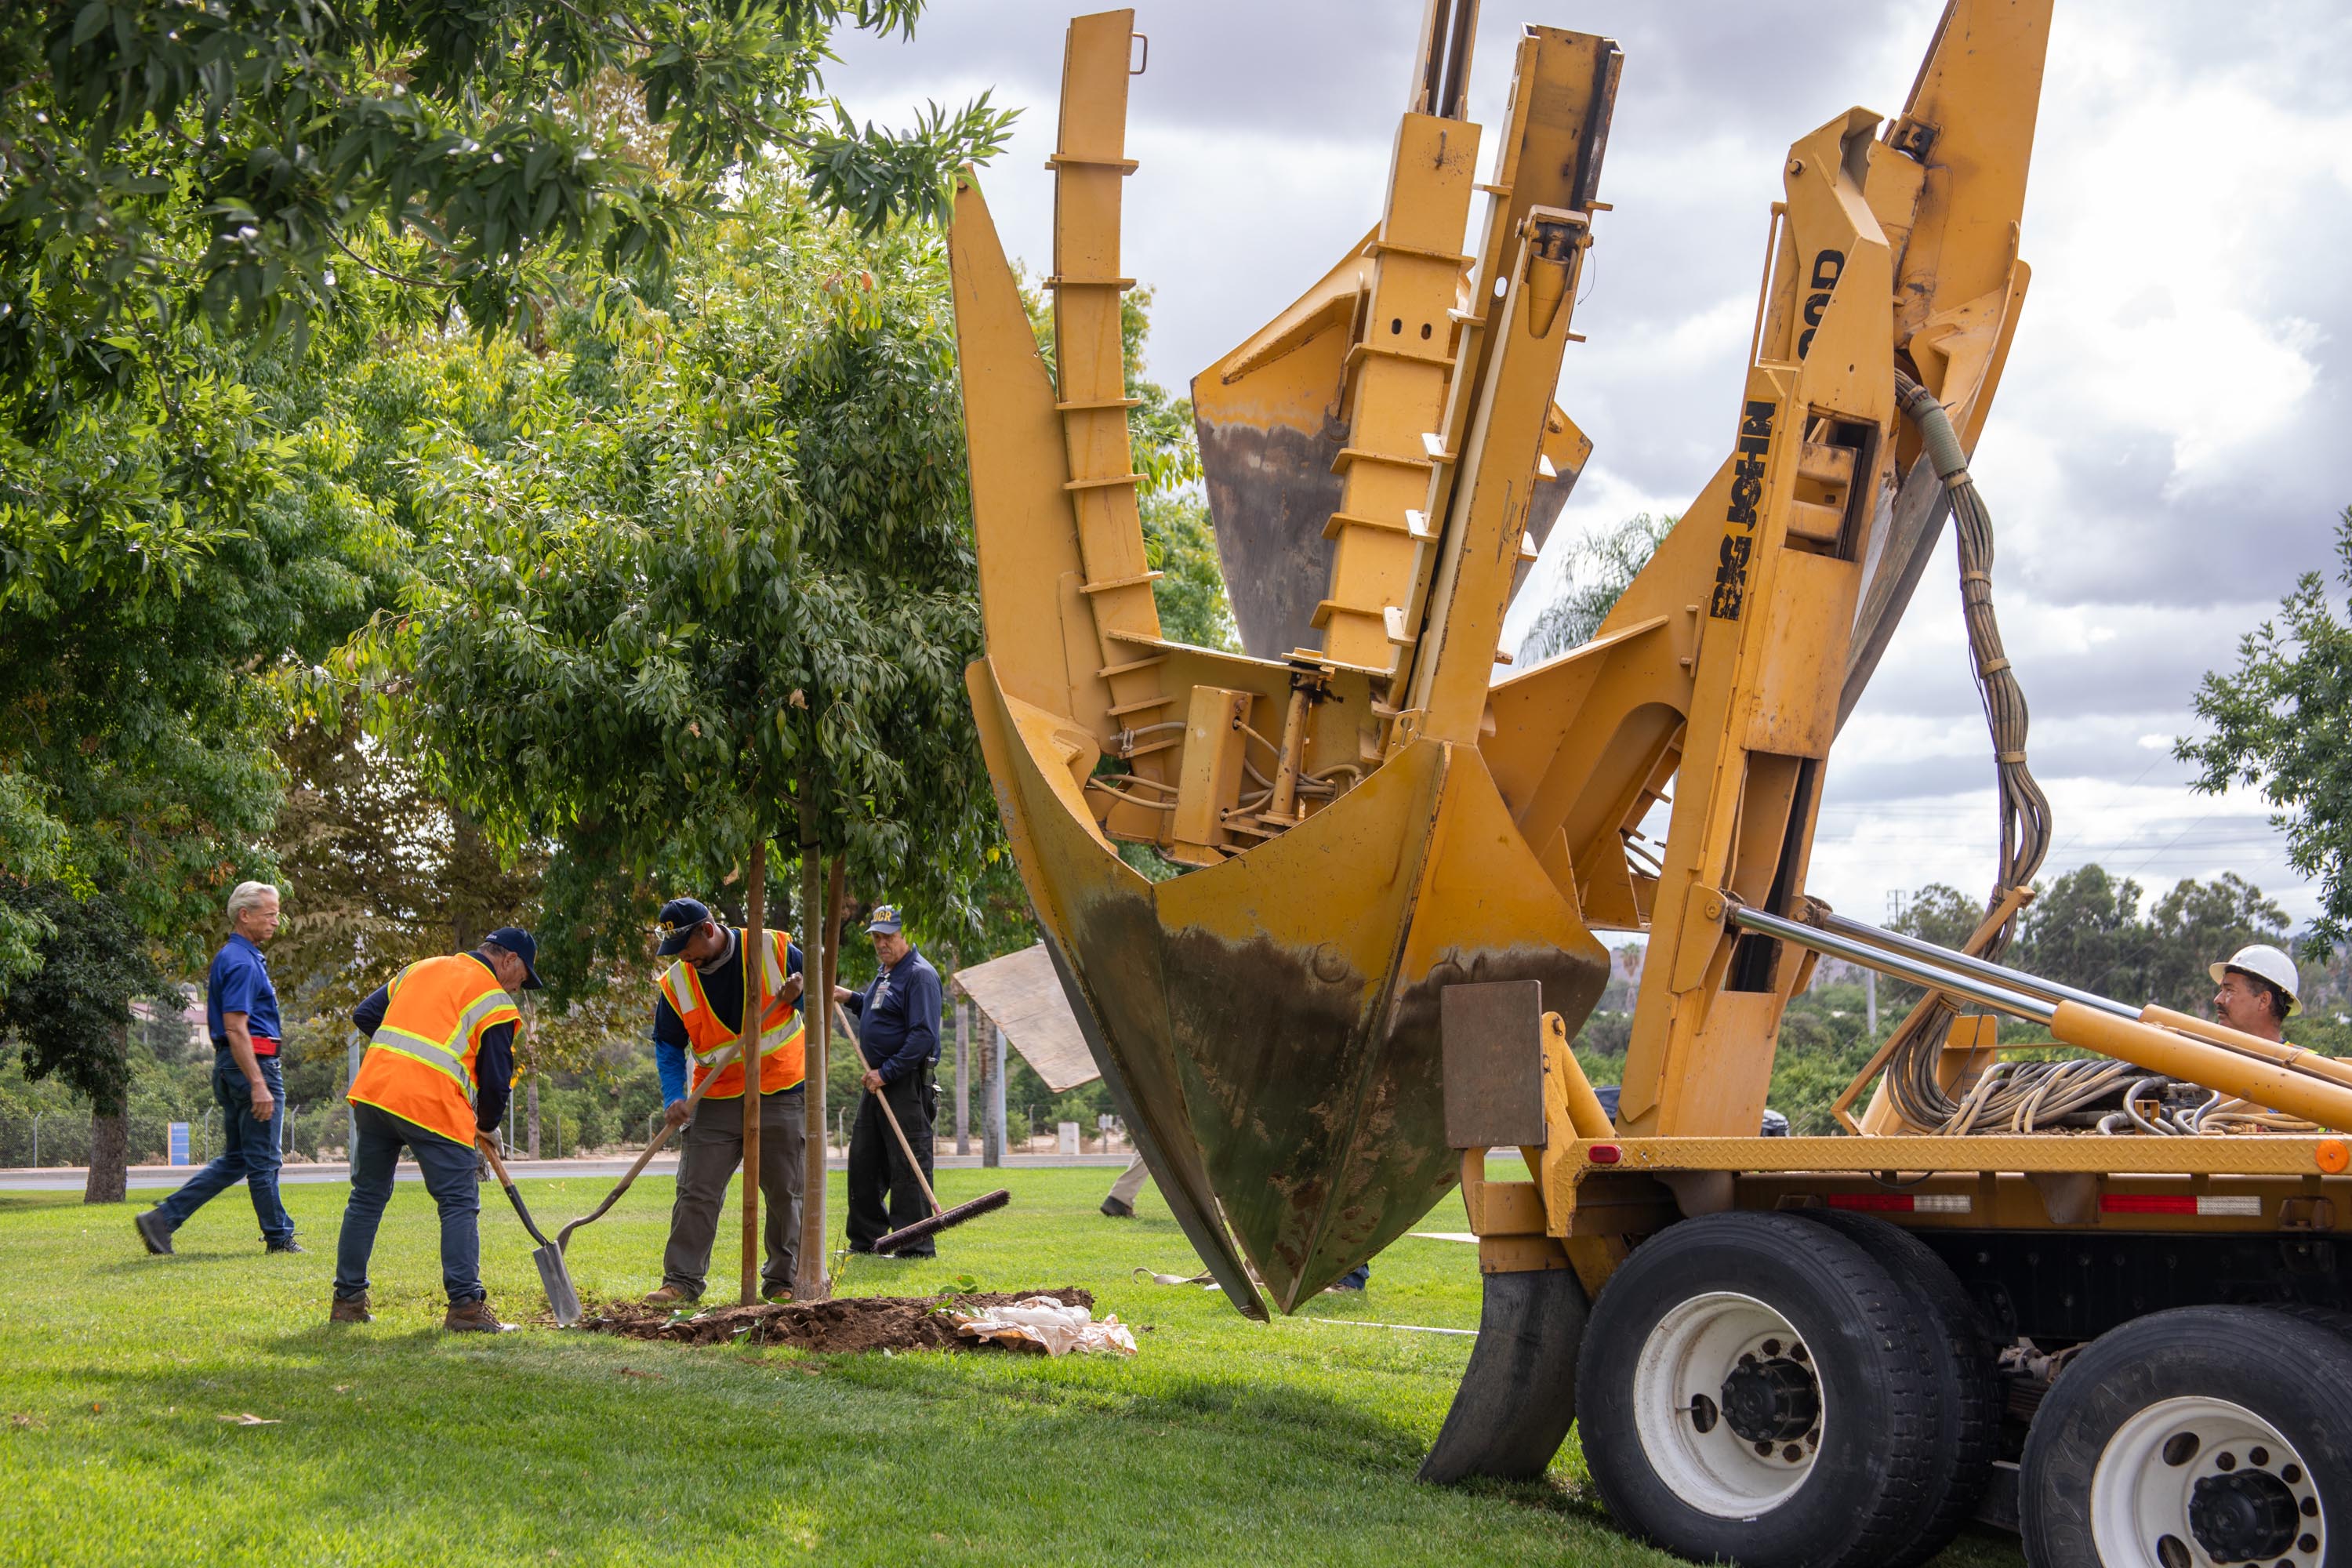 Two landscapers plant a tree next to equipment